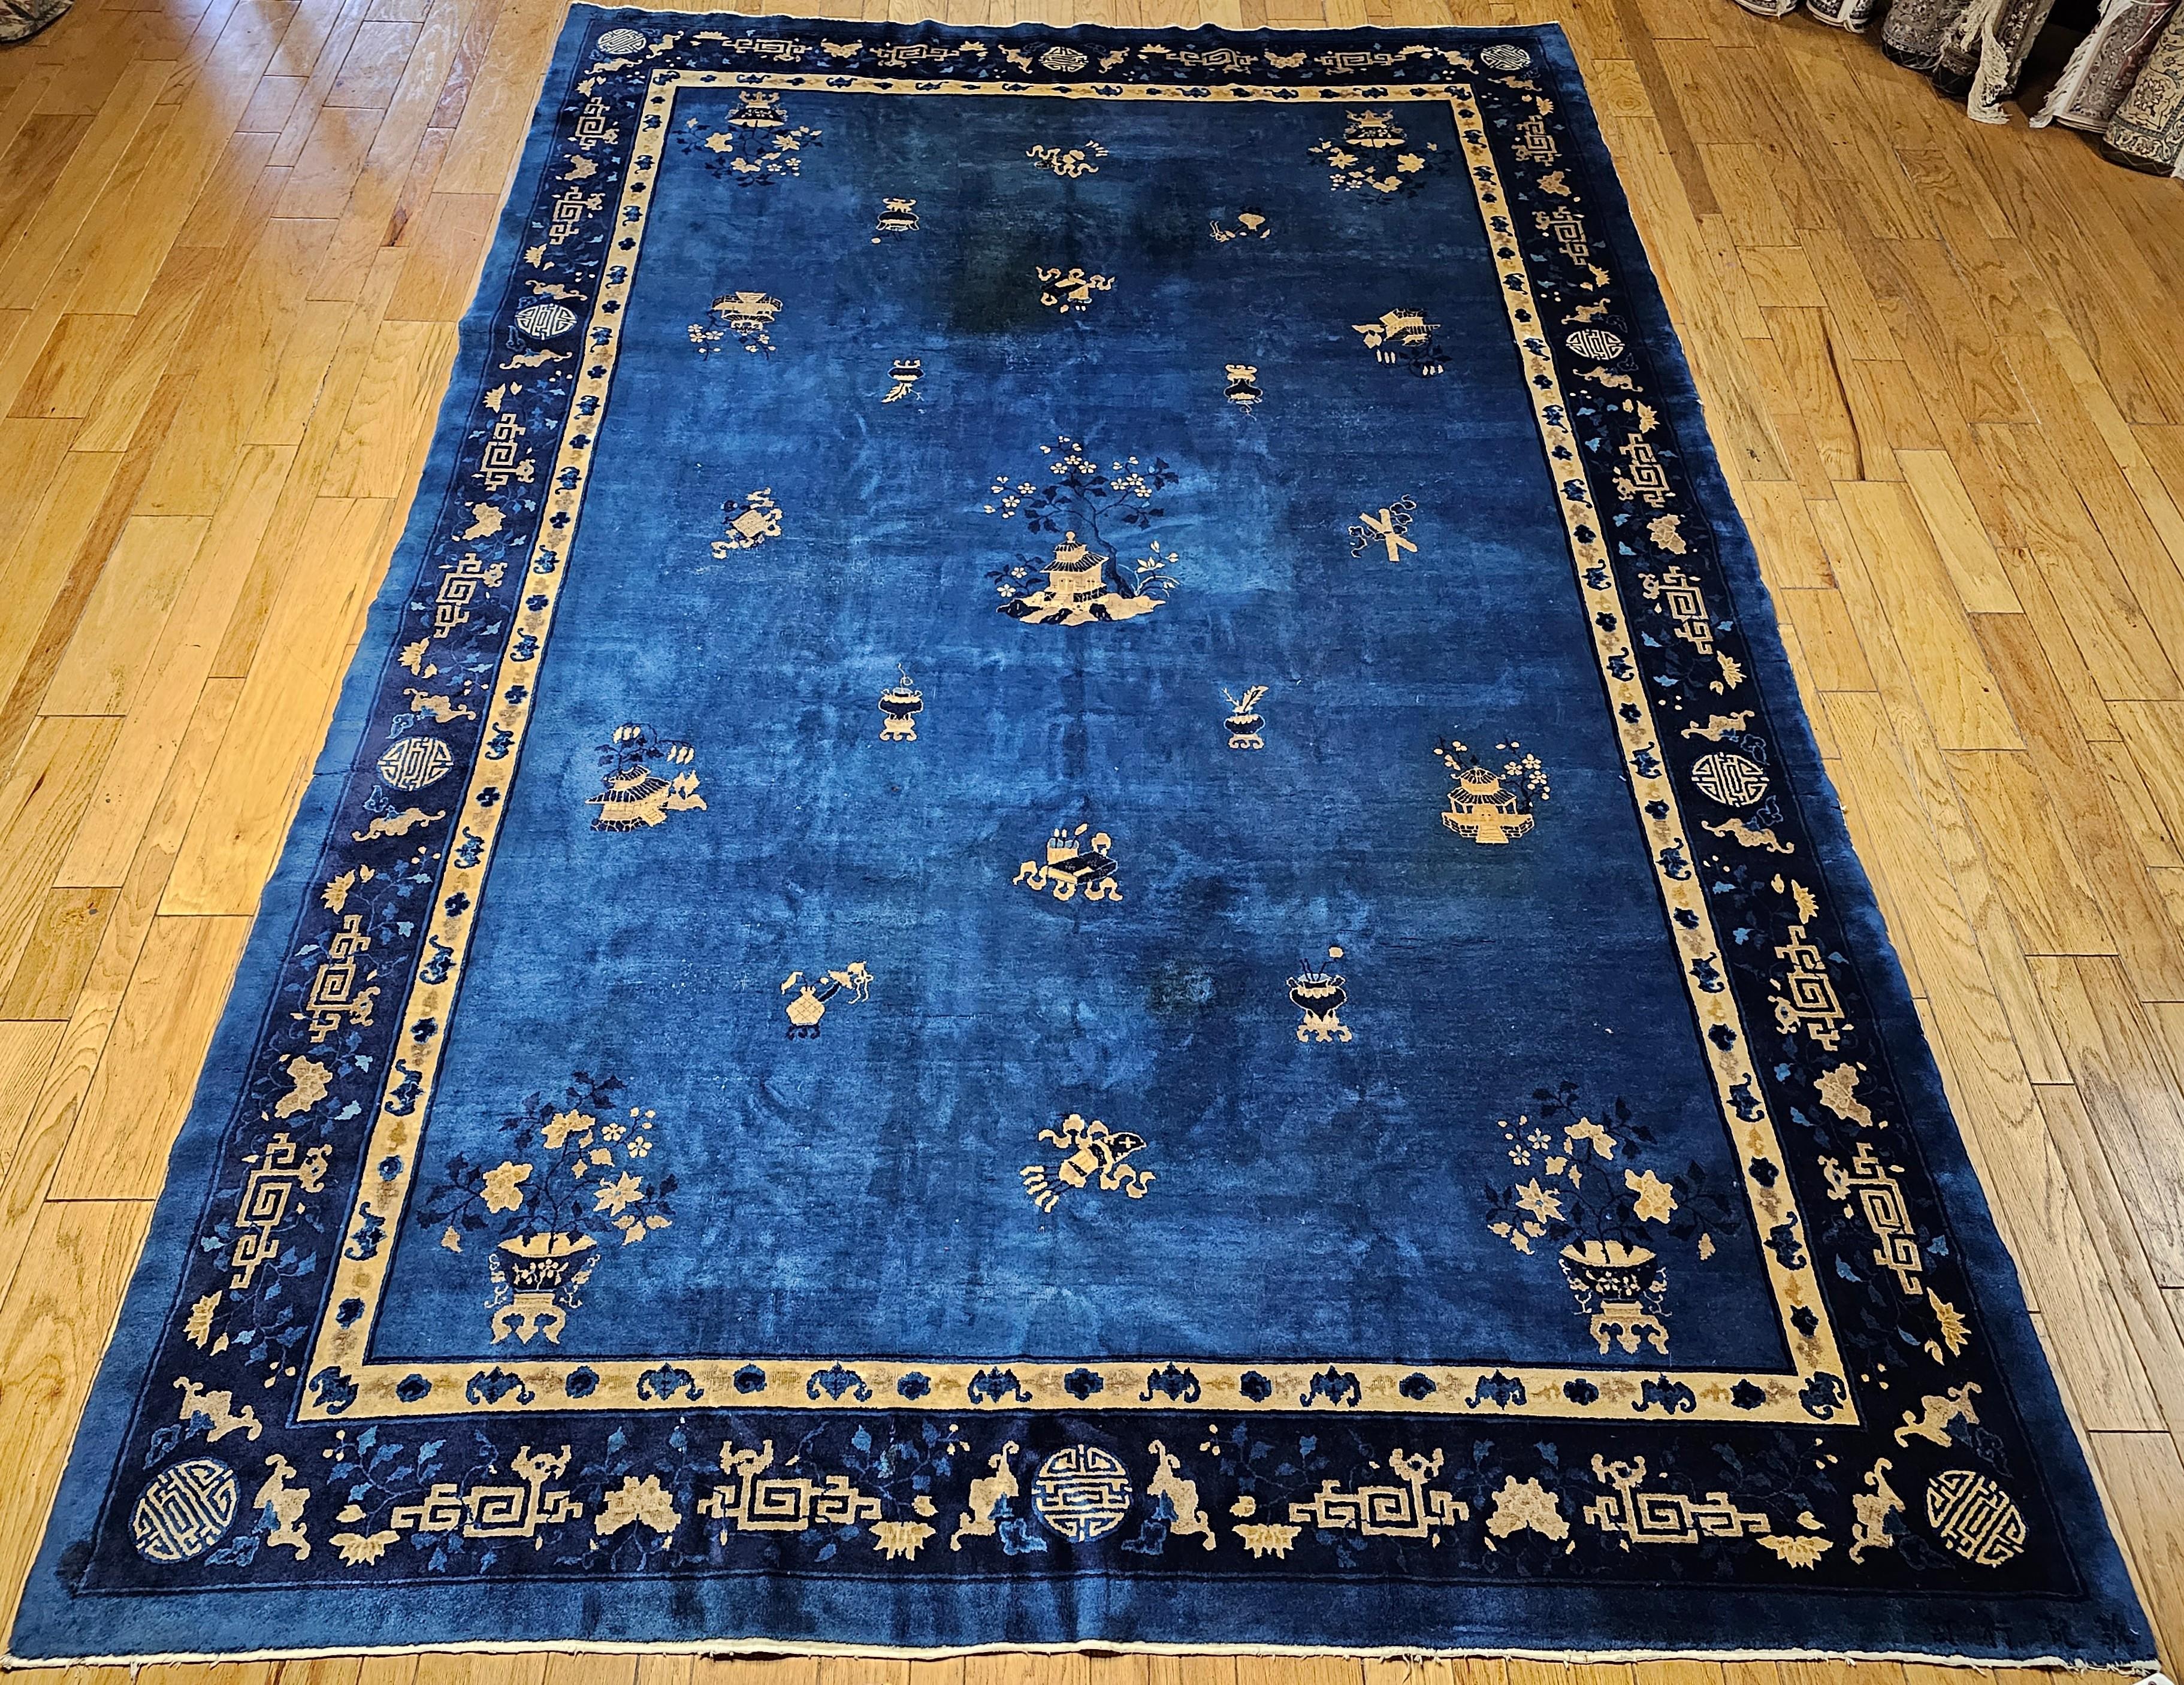 A beautiful Art Deco Chinese rug from the 1st quarter of the 1900s. The rug would bring in elegance through its understatement.  The rug has a Royal Blue color field with auspicious objects and symbols including incense burners, potted plants,